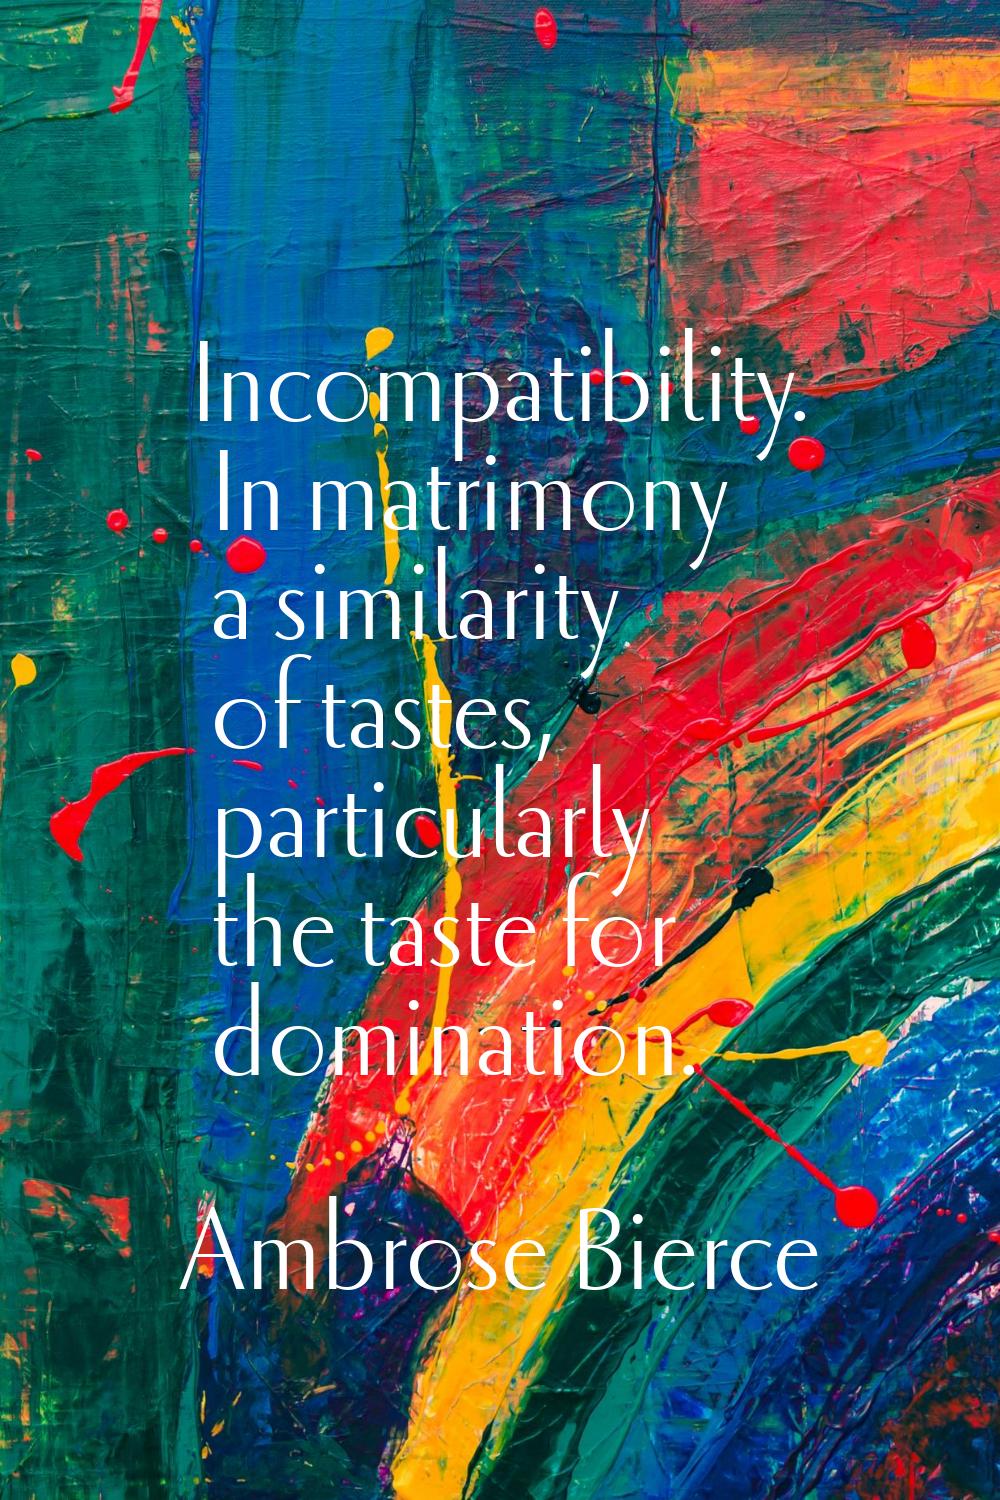 Incompatibility. In matrimony a similarity of tastes, particularly the taste for domination.